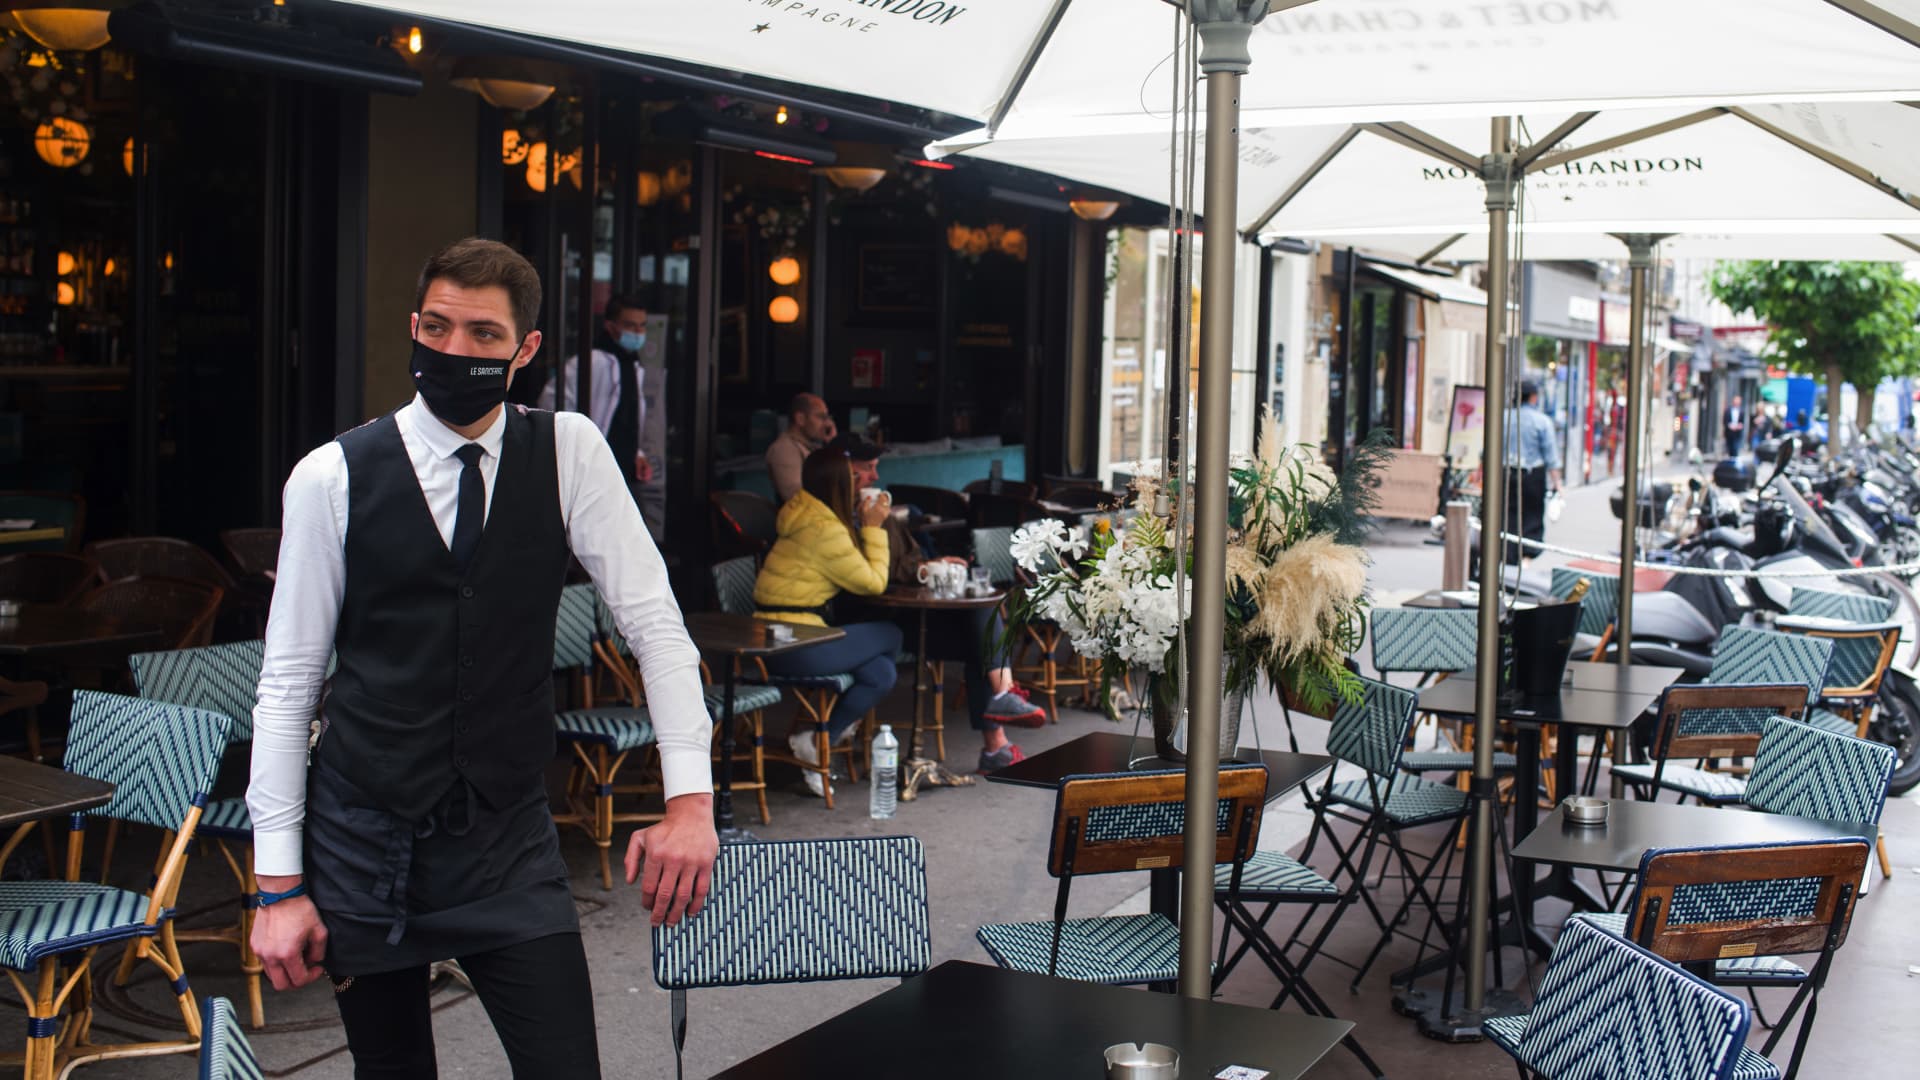 A waiter waits for customers on an extended cafe terrace area in Paris, France.